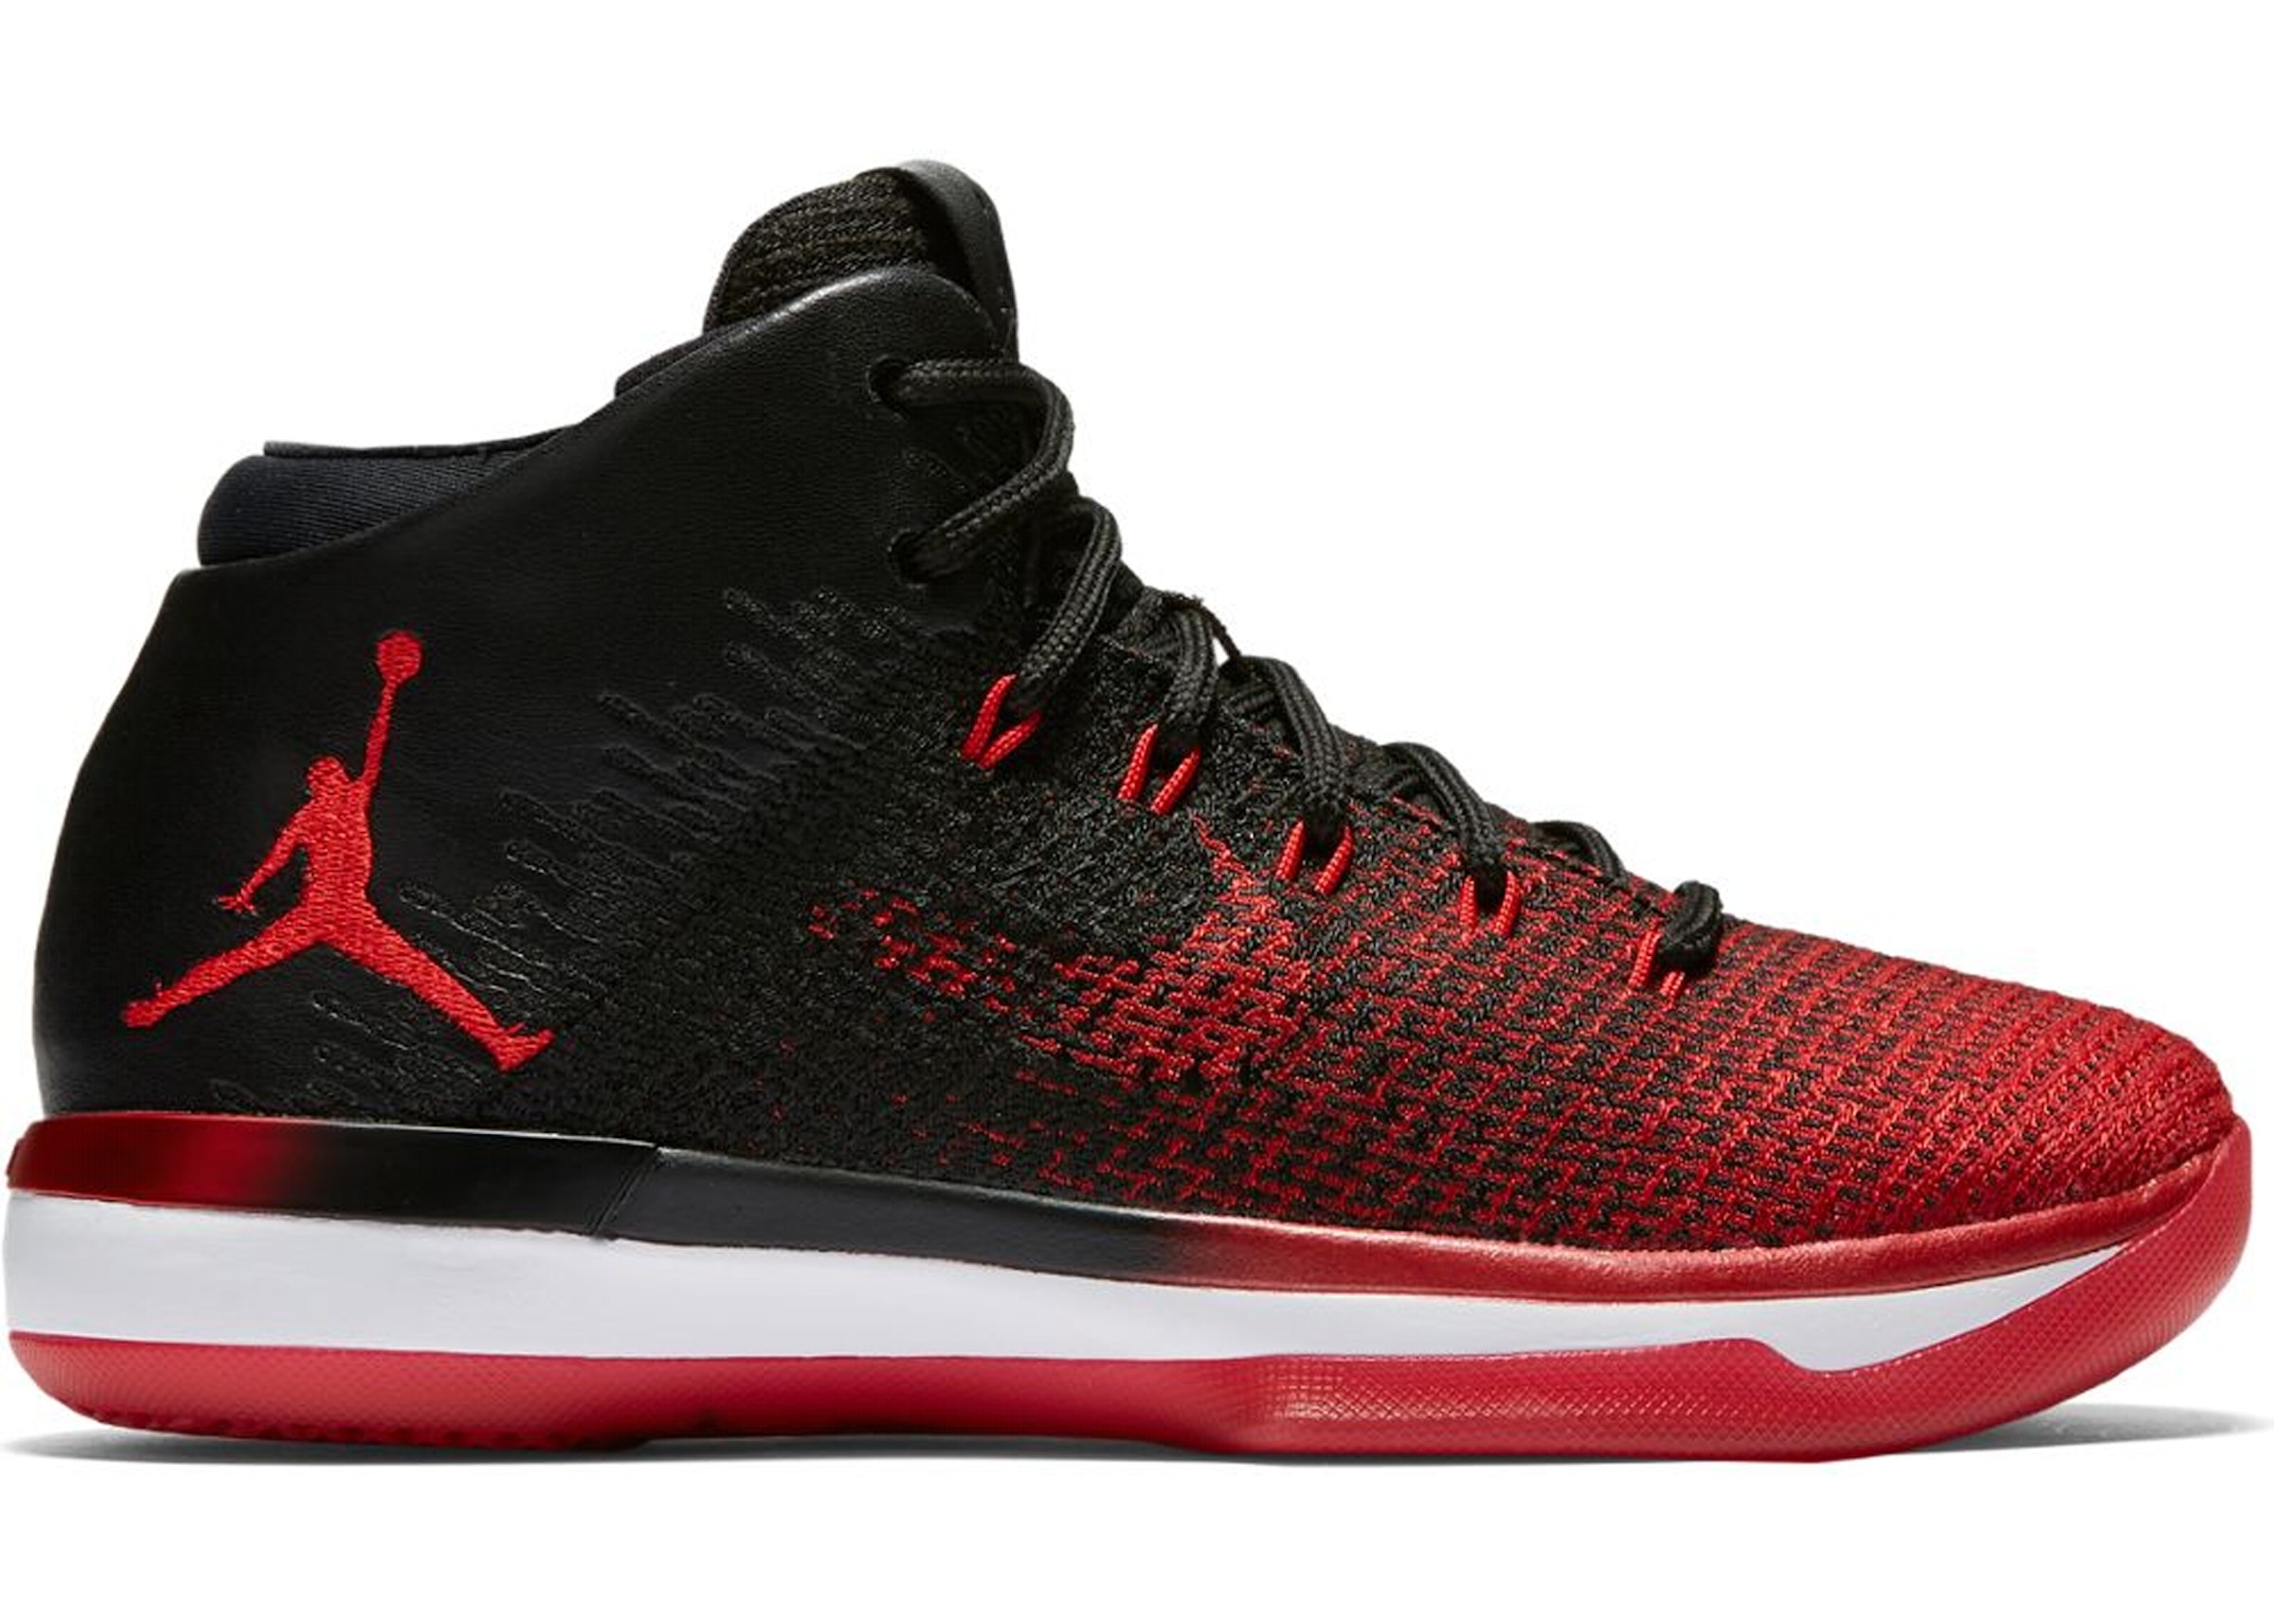 Plakater Diplomati Tomhed Jordan XXXI Banned (GS) - 848629-001 - US